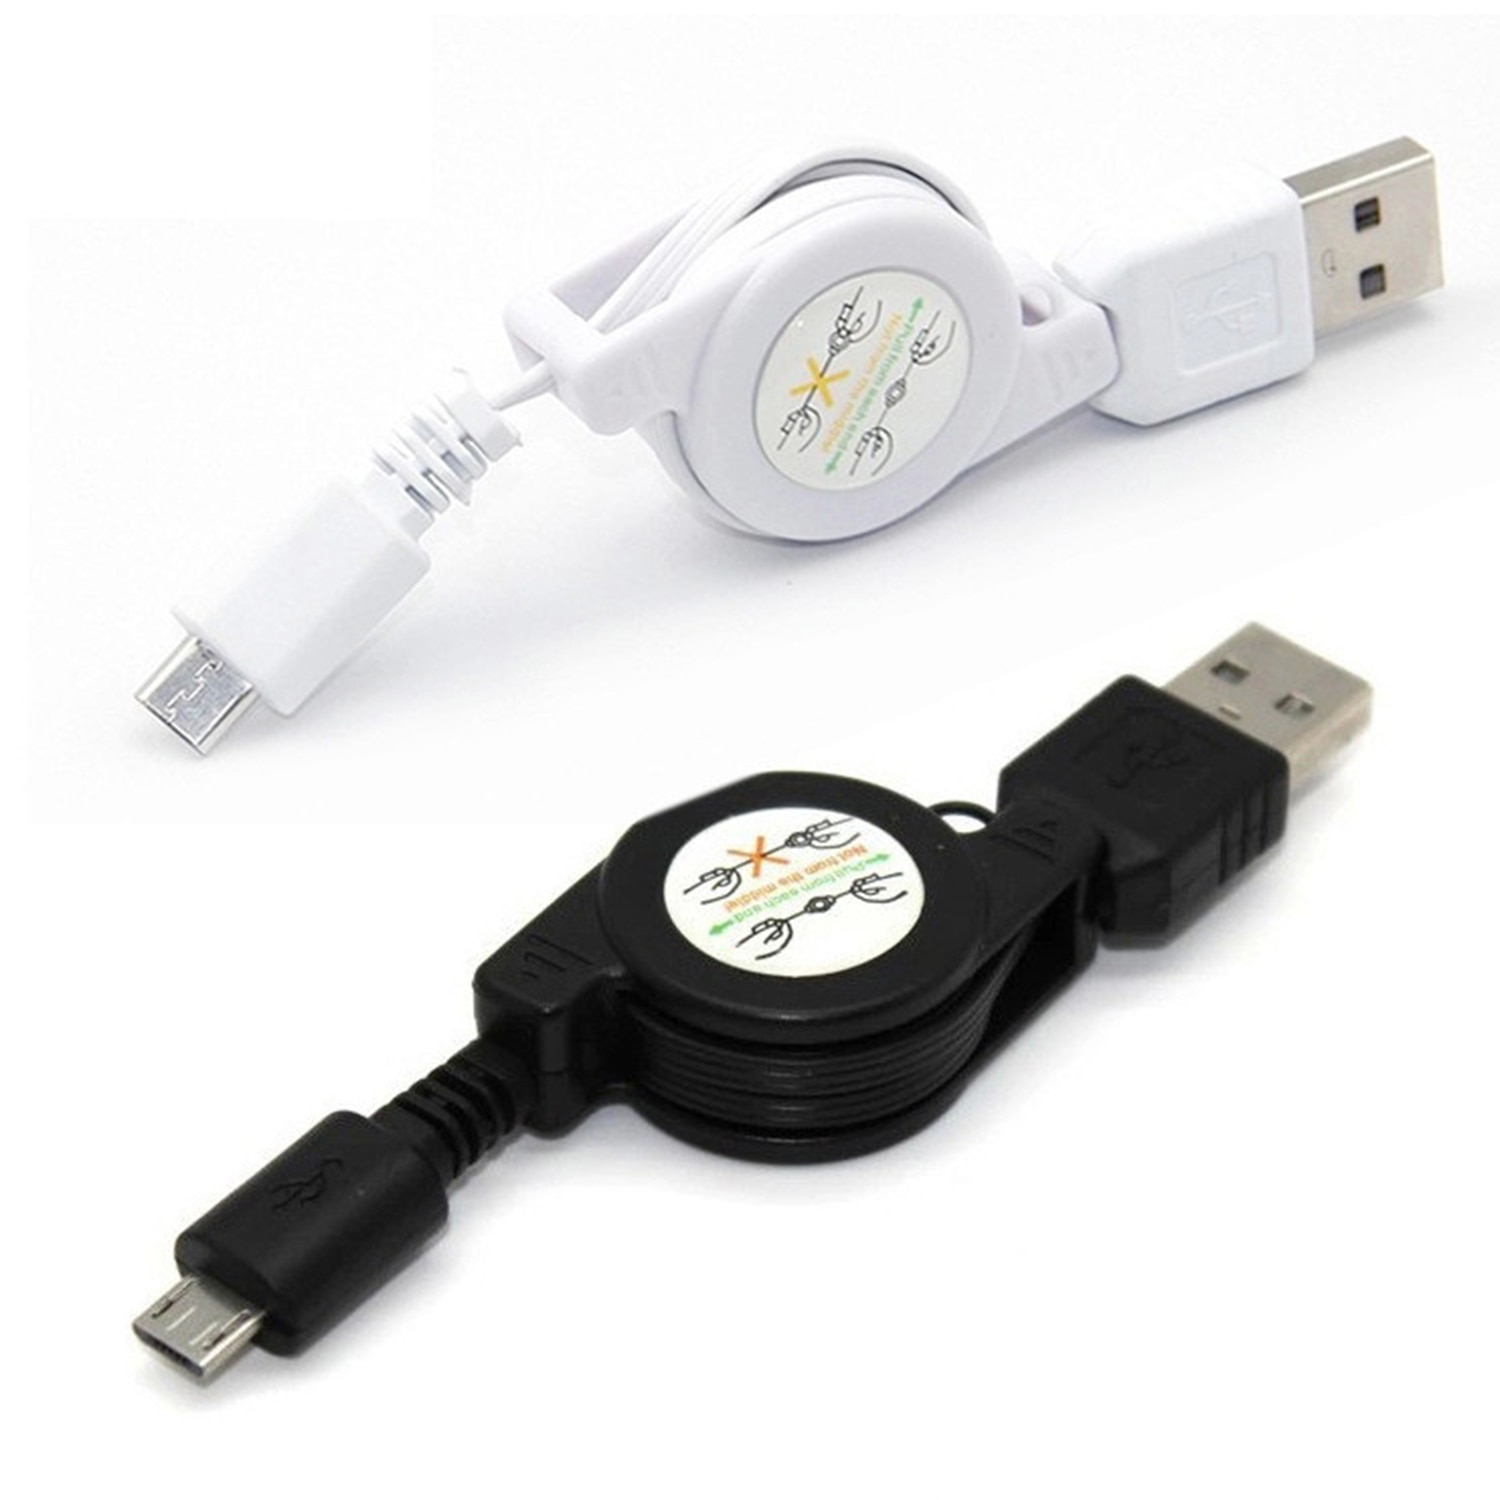 Intrekbare Usb Data Sync &amp; Charger Cable Koord Voor Telefoon Tablelet Android Iphone Smartphone